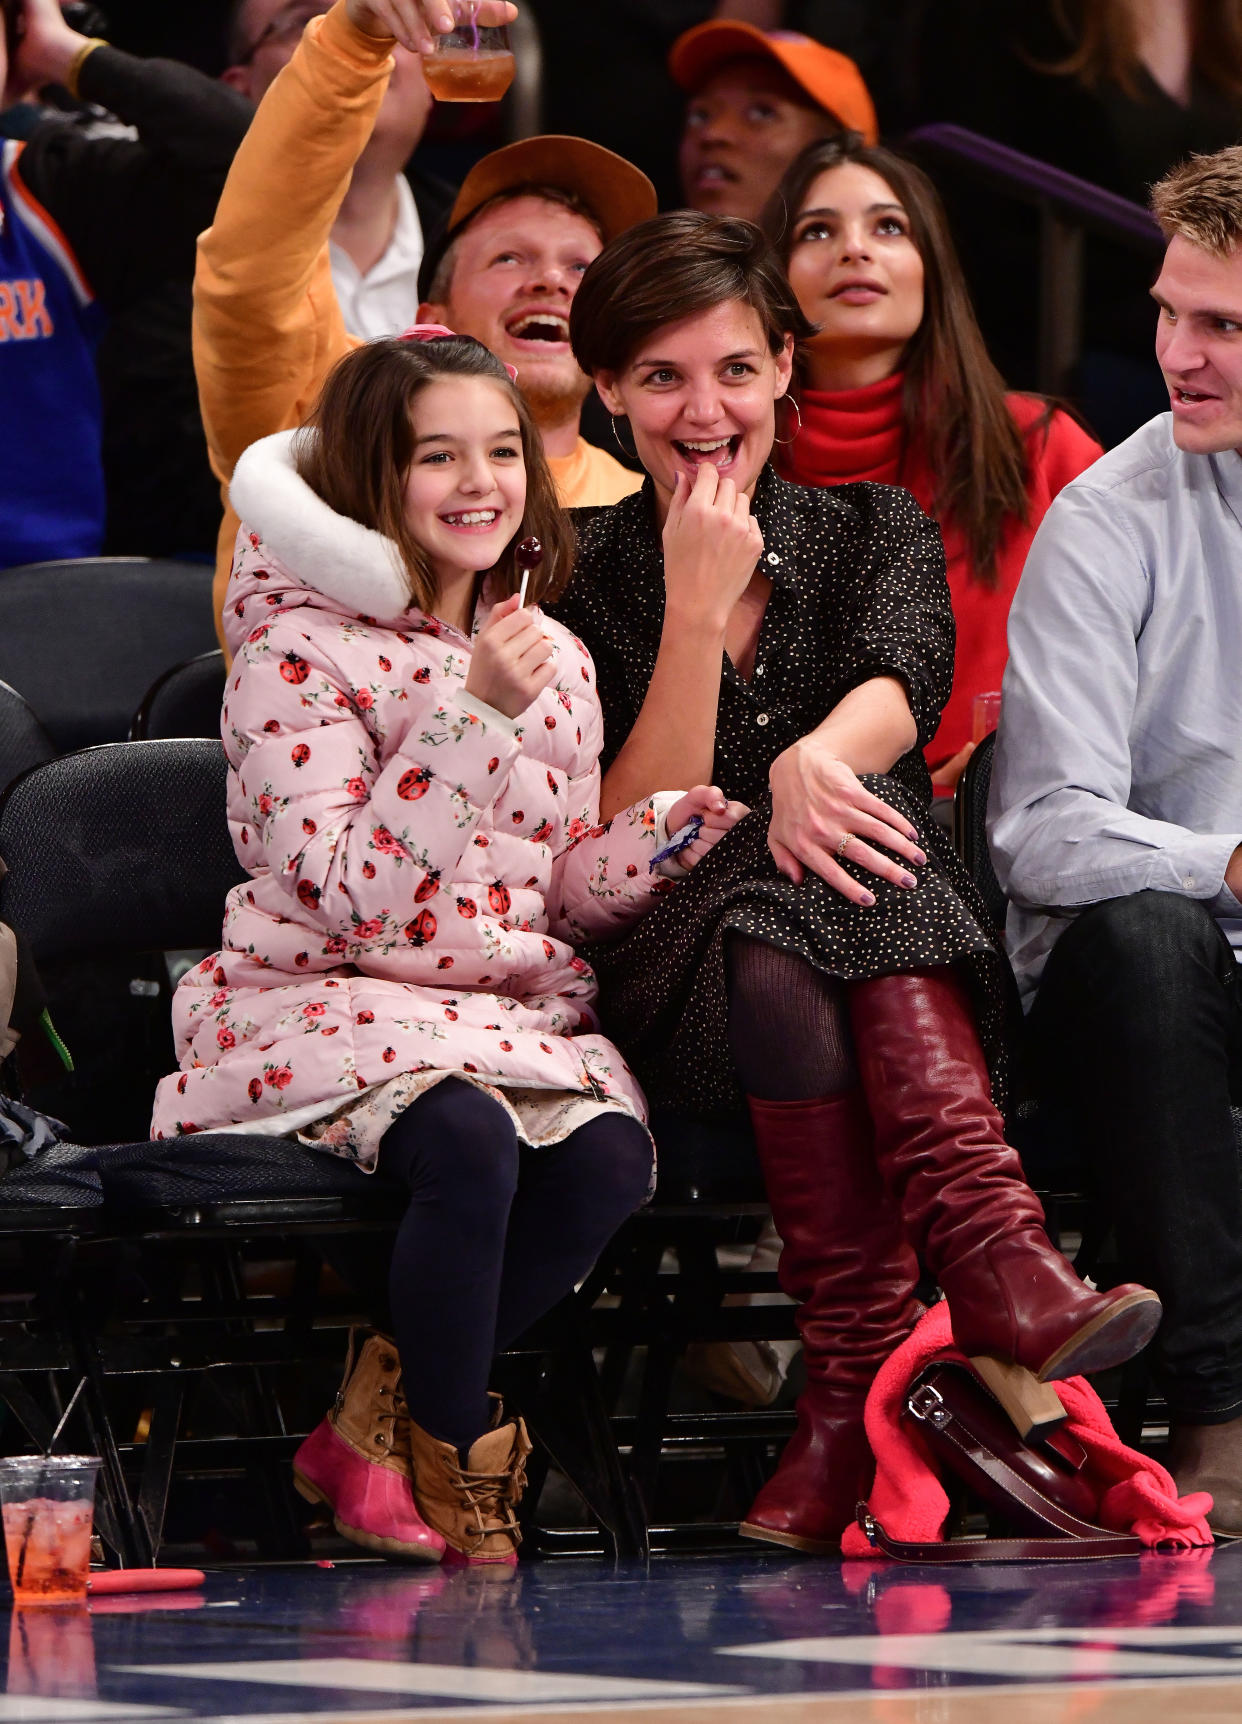 NEW YORK, NY - DECEMBER 16:  Suri Cruise and Katie Holmes attend the Oklahoma City Thunder Vs New York Knicks game at Madison Square Garden on December 16, 2017 in New York City.  (Photo by James Devaney/Getty Images)